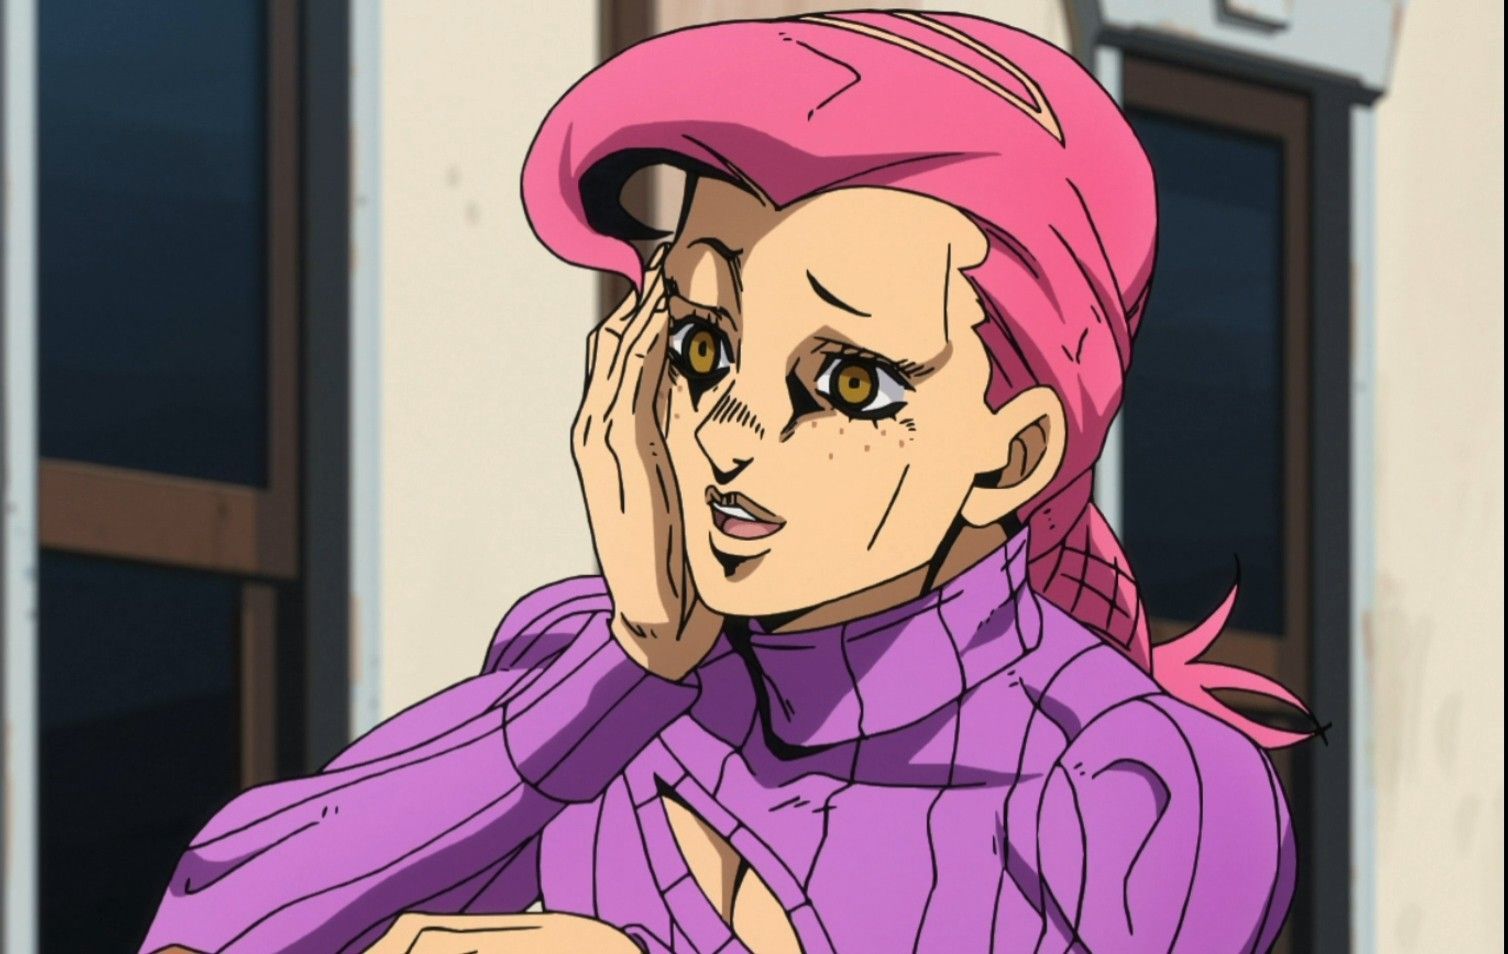 Jojo, or what is bias - My, Anime, Haters, Community, Psychology, Bias, Morality